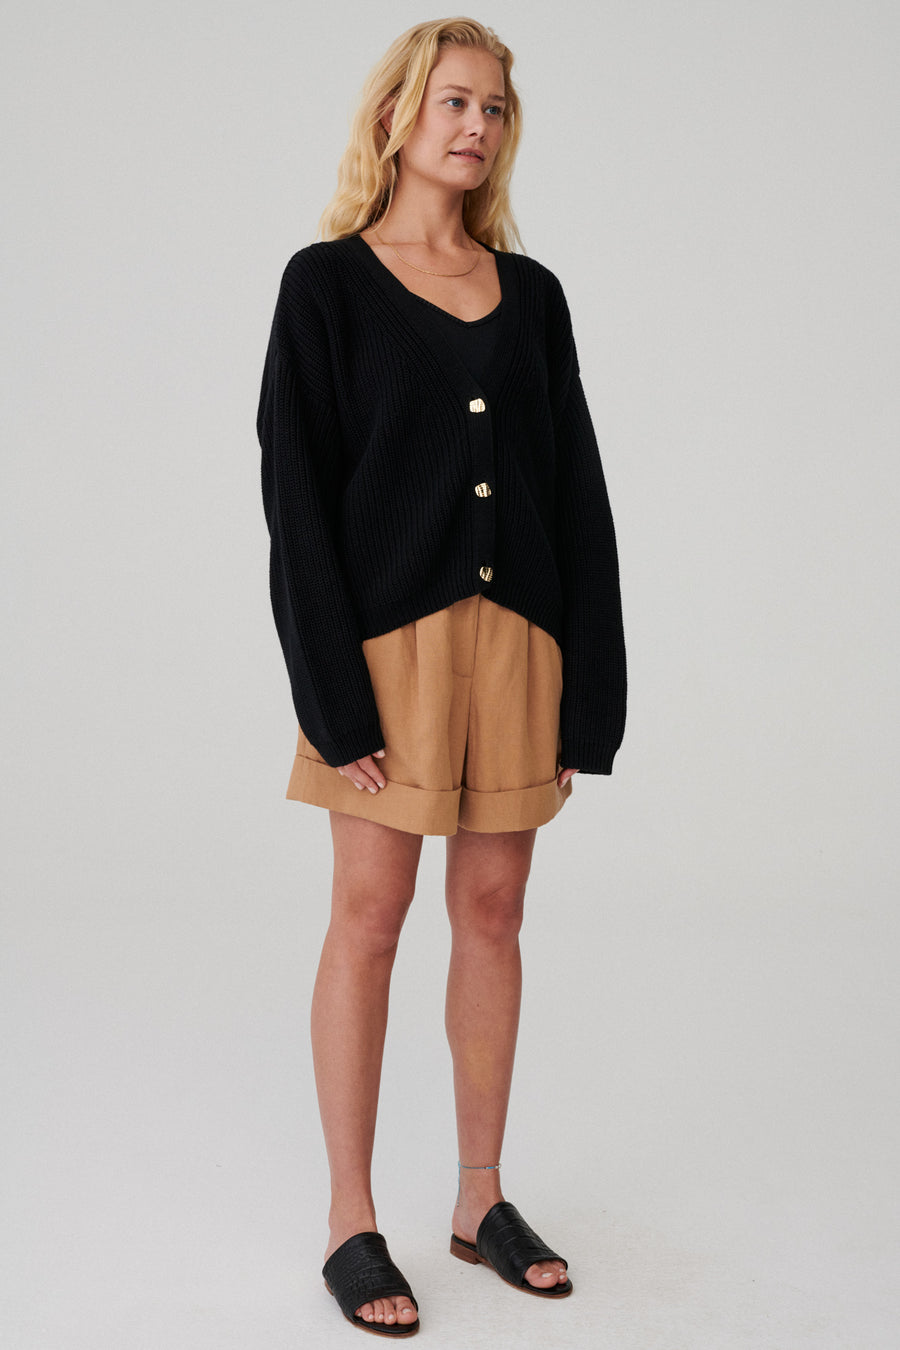 Cardigan in organic cotton / 16 / 06 / onyx black / gold wave buttons ?The model is 173 cm tall and wears size XS/S?